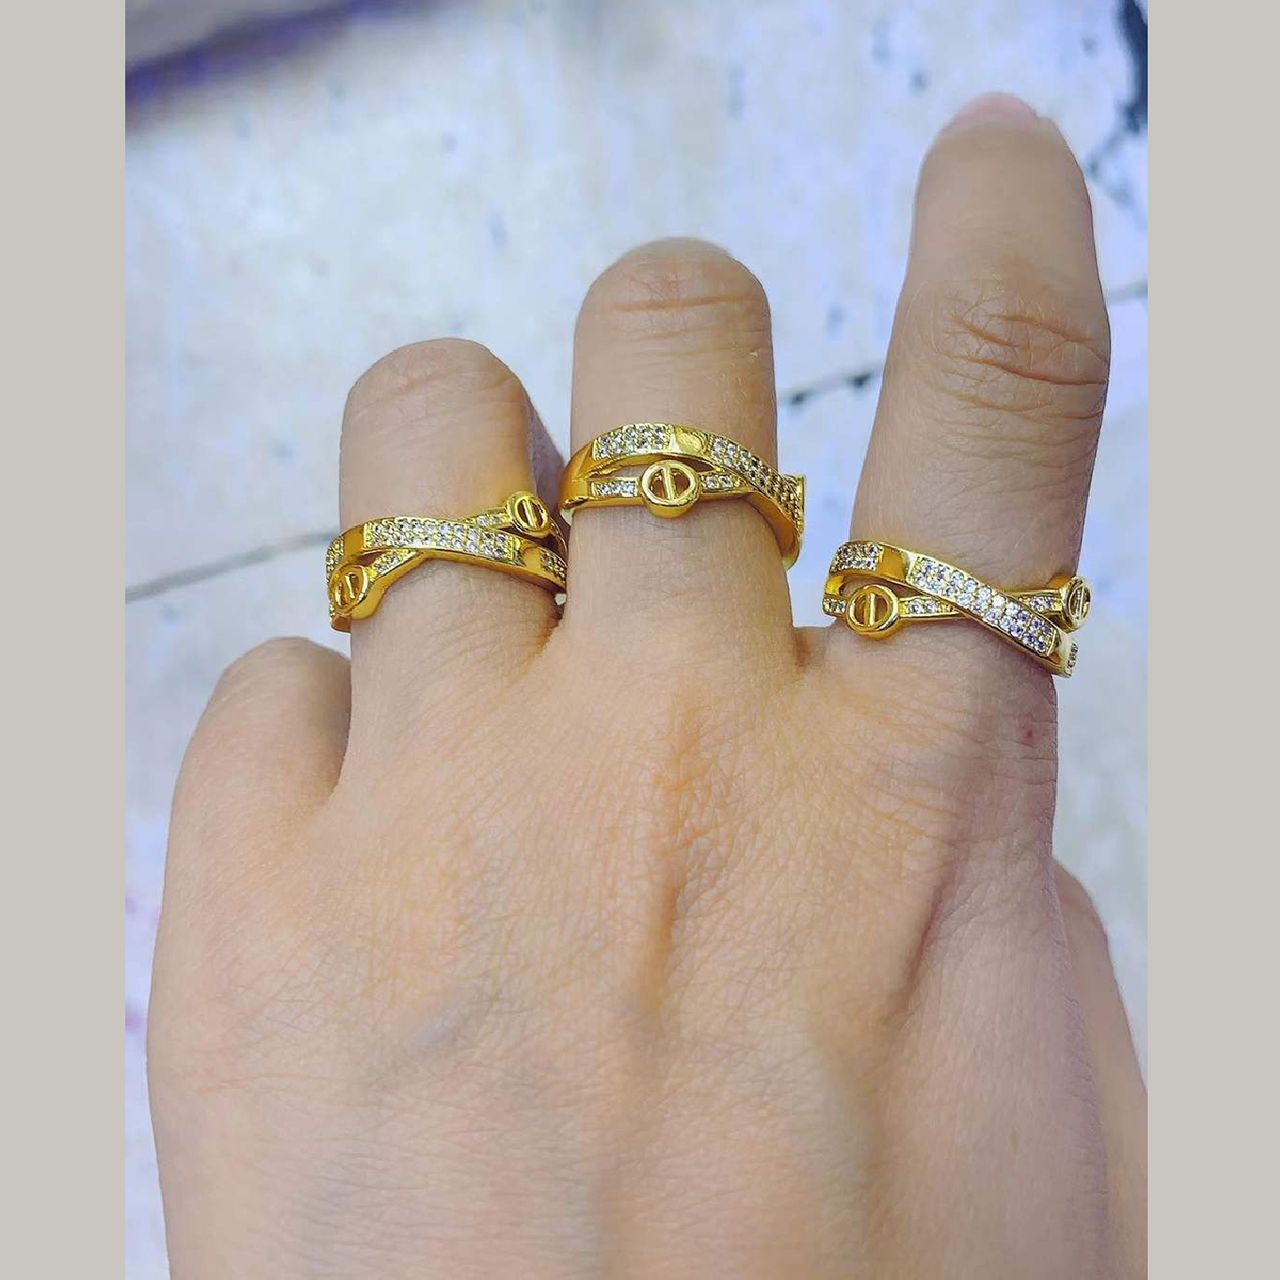 WRS WEDDING RING SET TWO RINGS His Hers Wedding Ring Sets Couples Rings  India | Ubuy